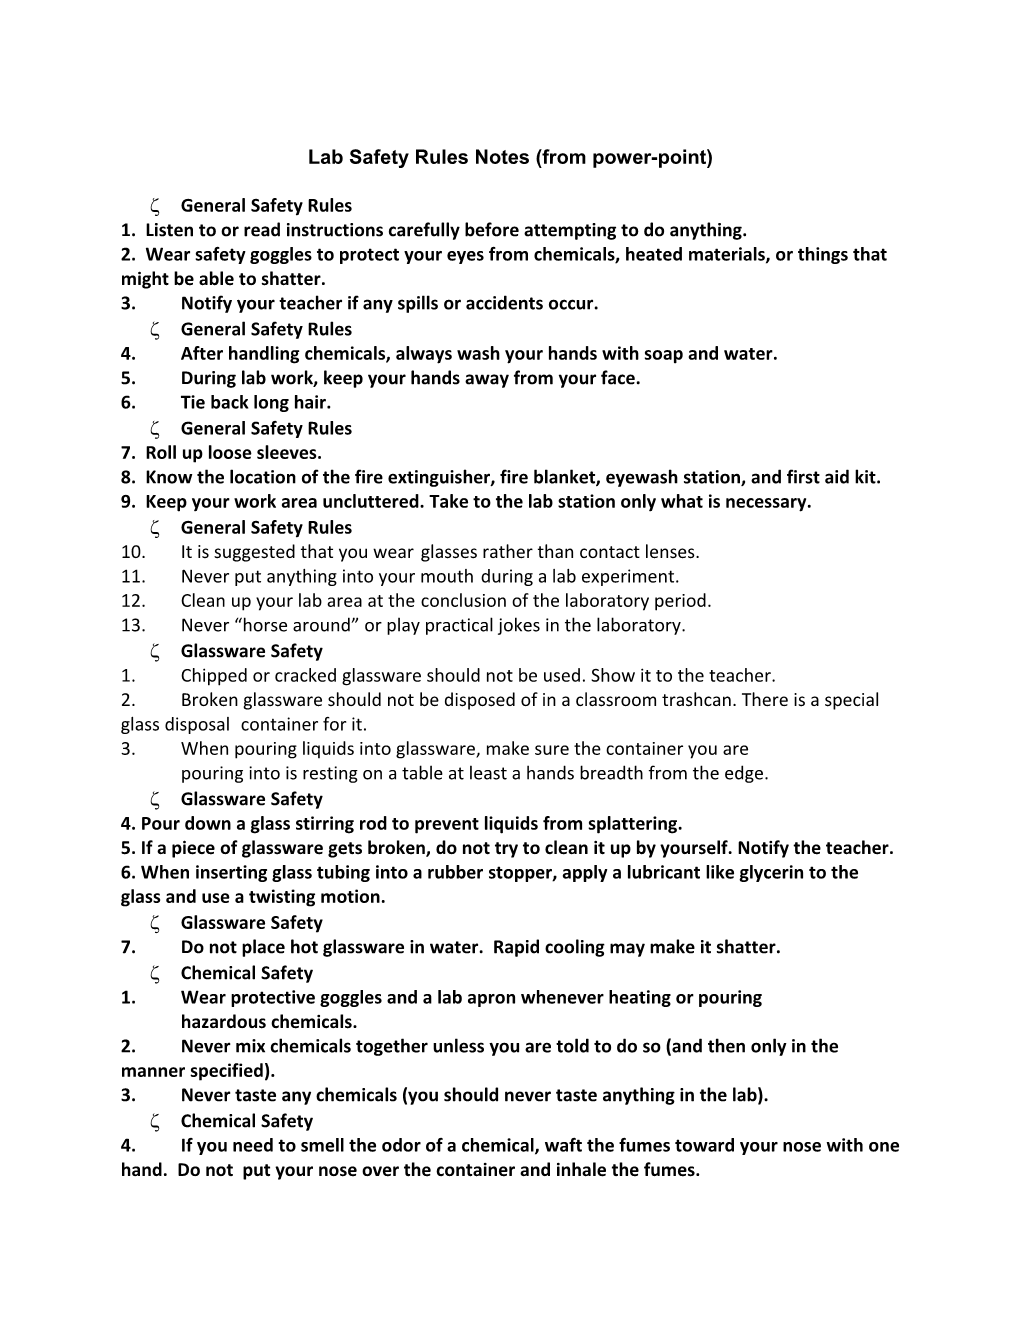 Lab Safety Rules Notes (From Power-Point)